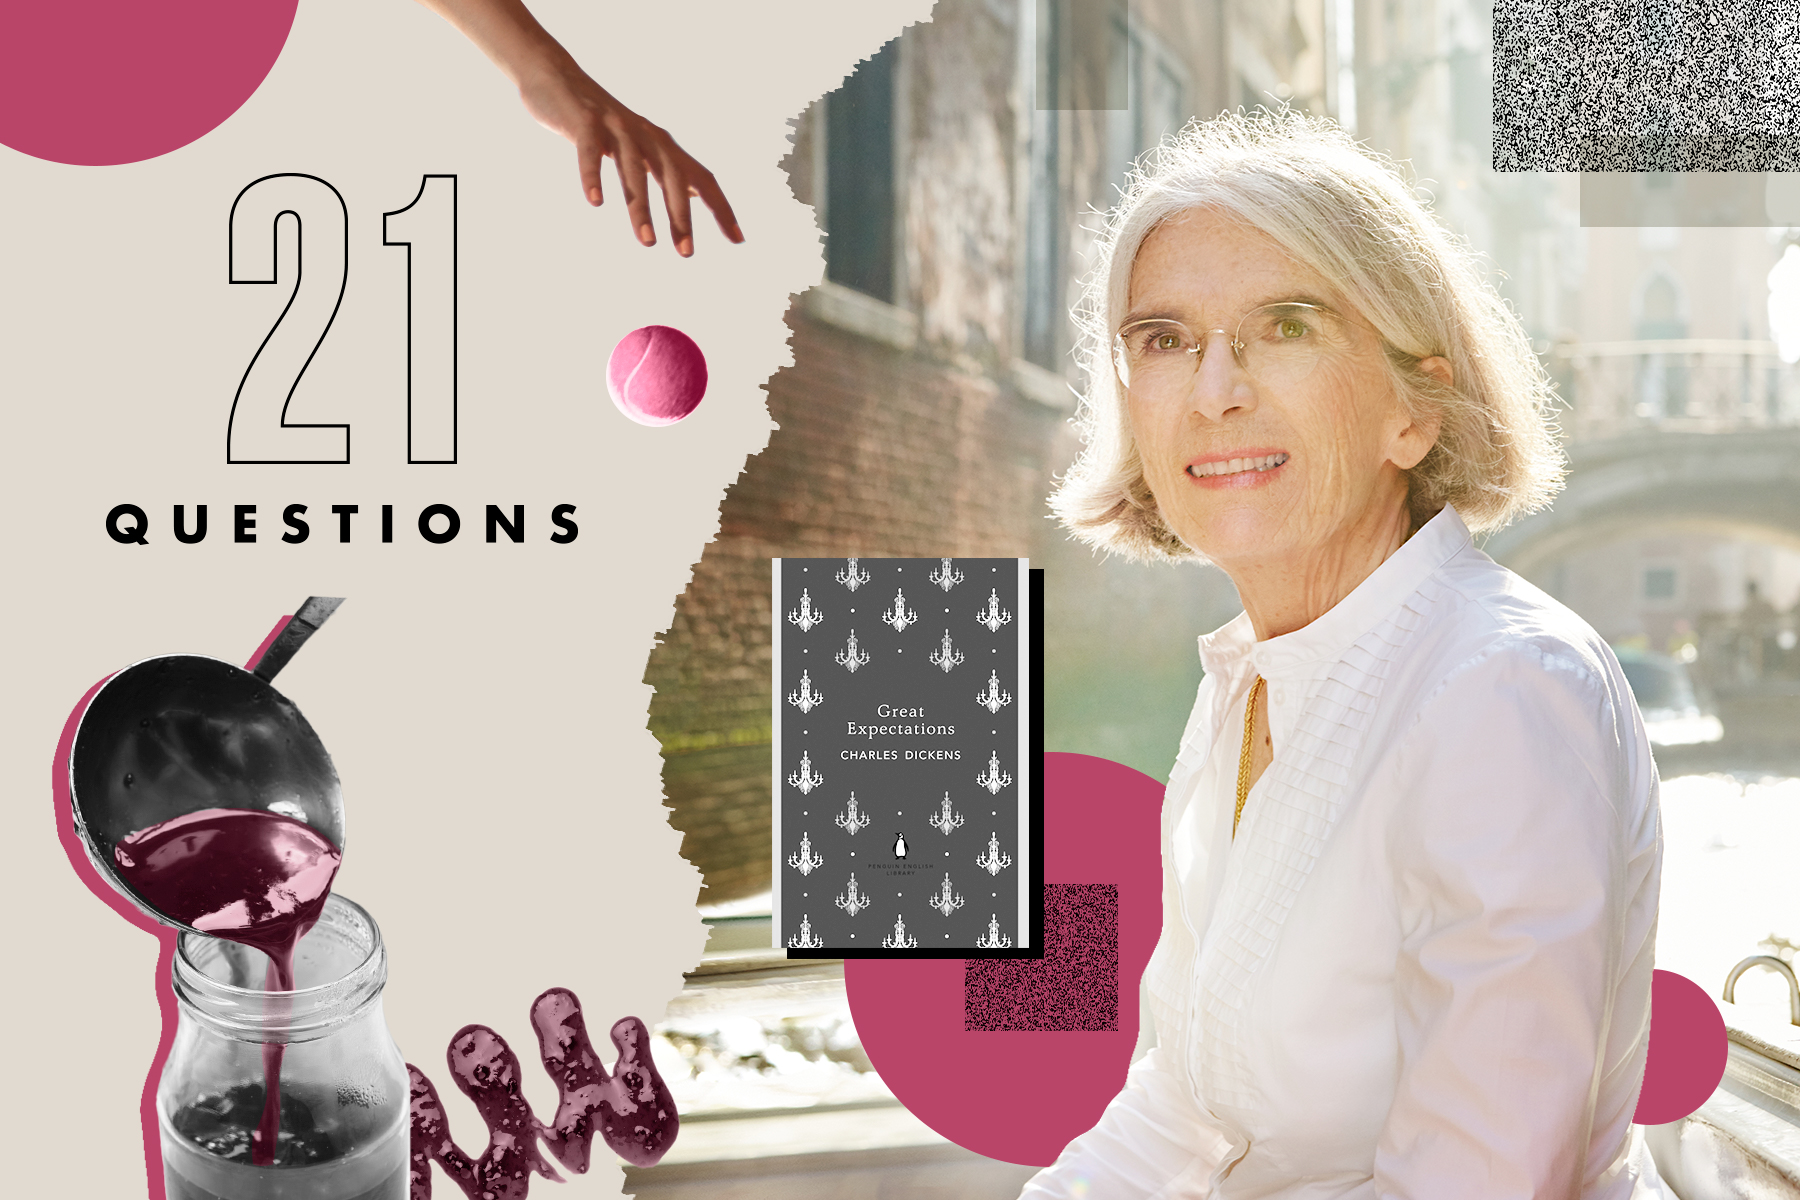 A photo of Donna Leon, author of Give Unto Others, side-by-side with the interview title, 21 Questions, on a fuchsia and grayscale background.